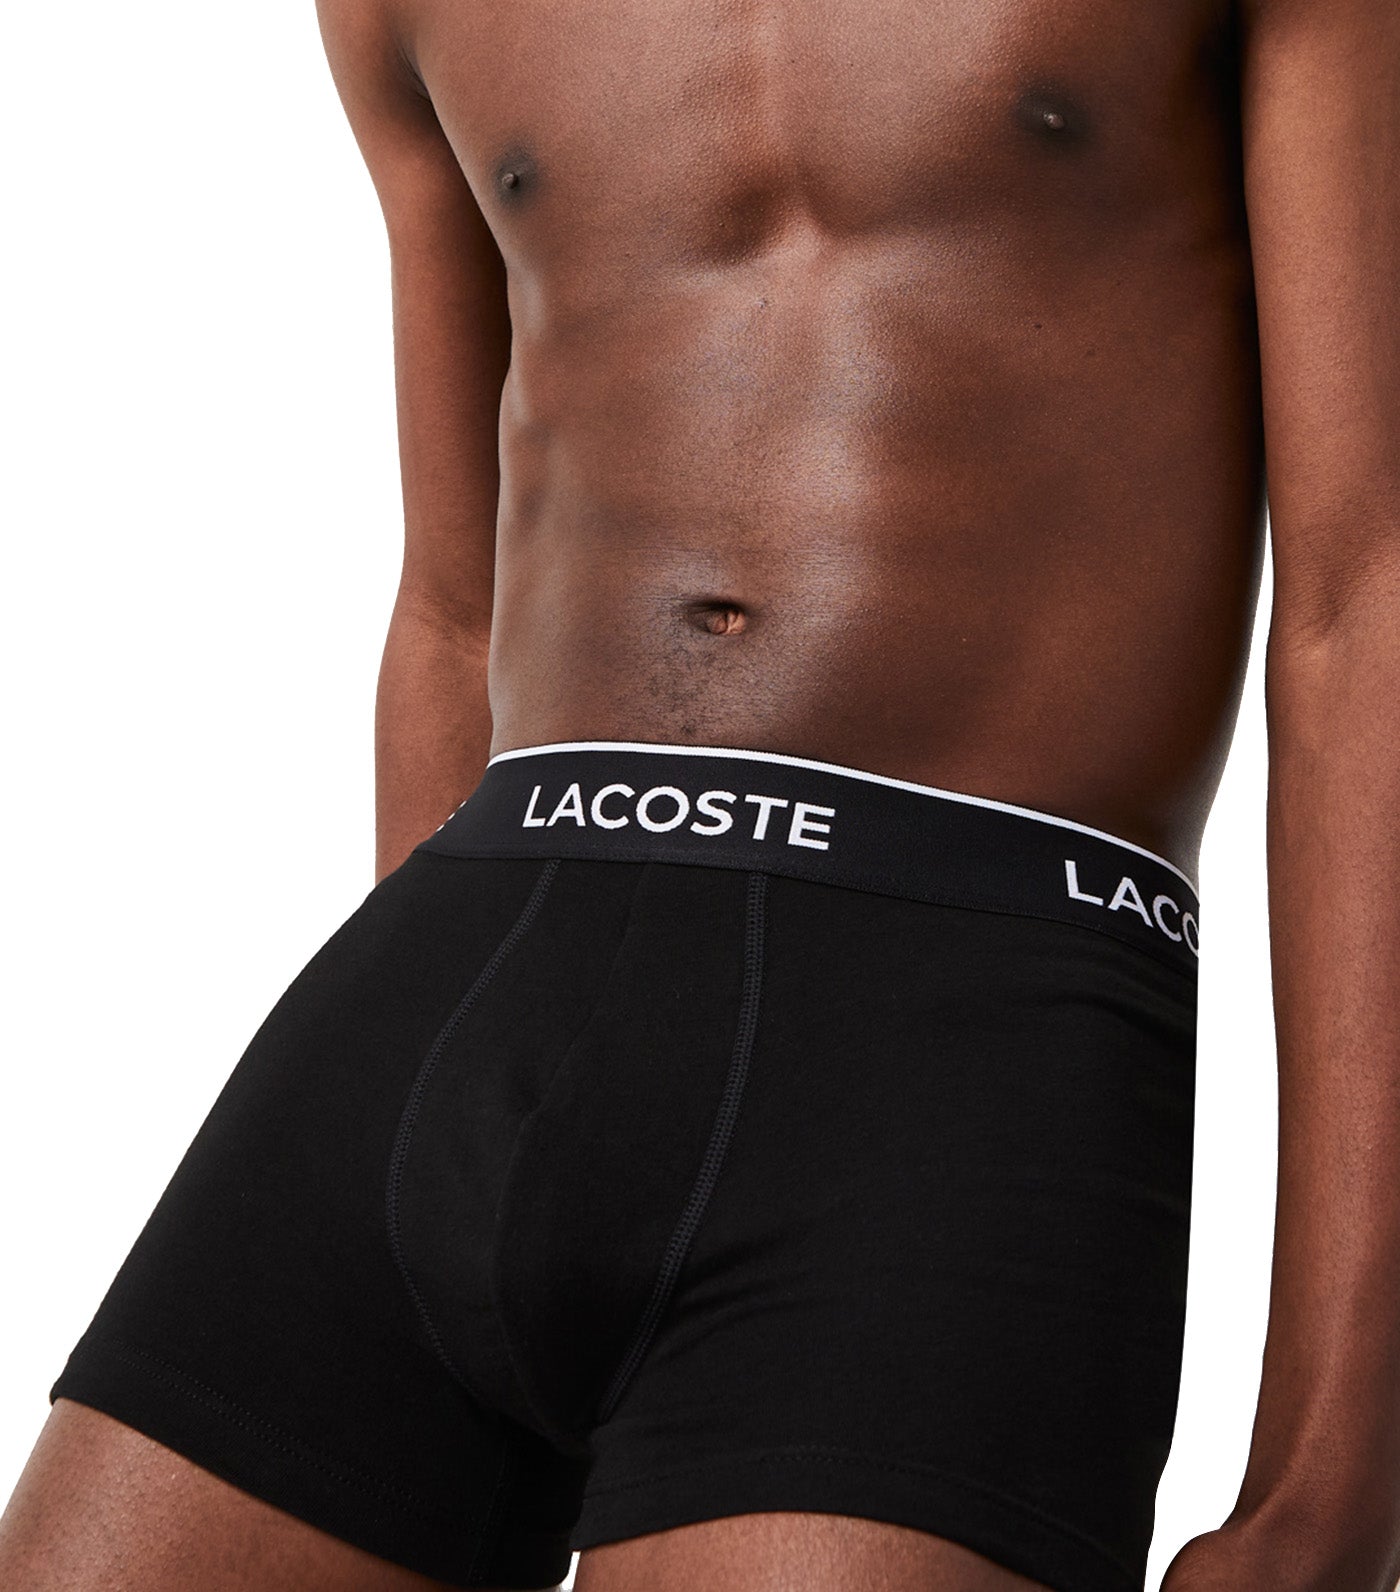 Pack of 3 Casual Boxer Briefs Black